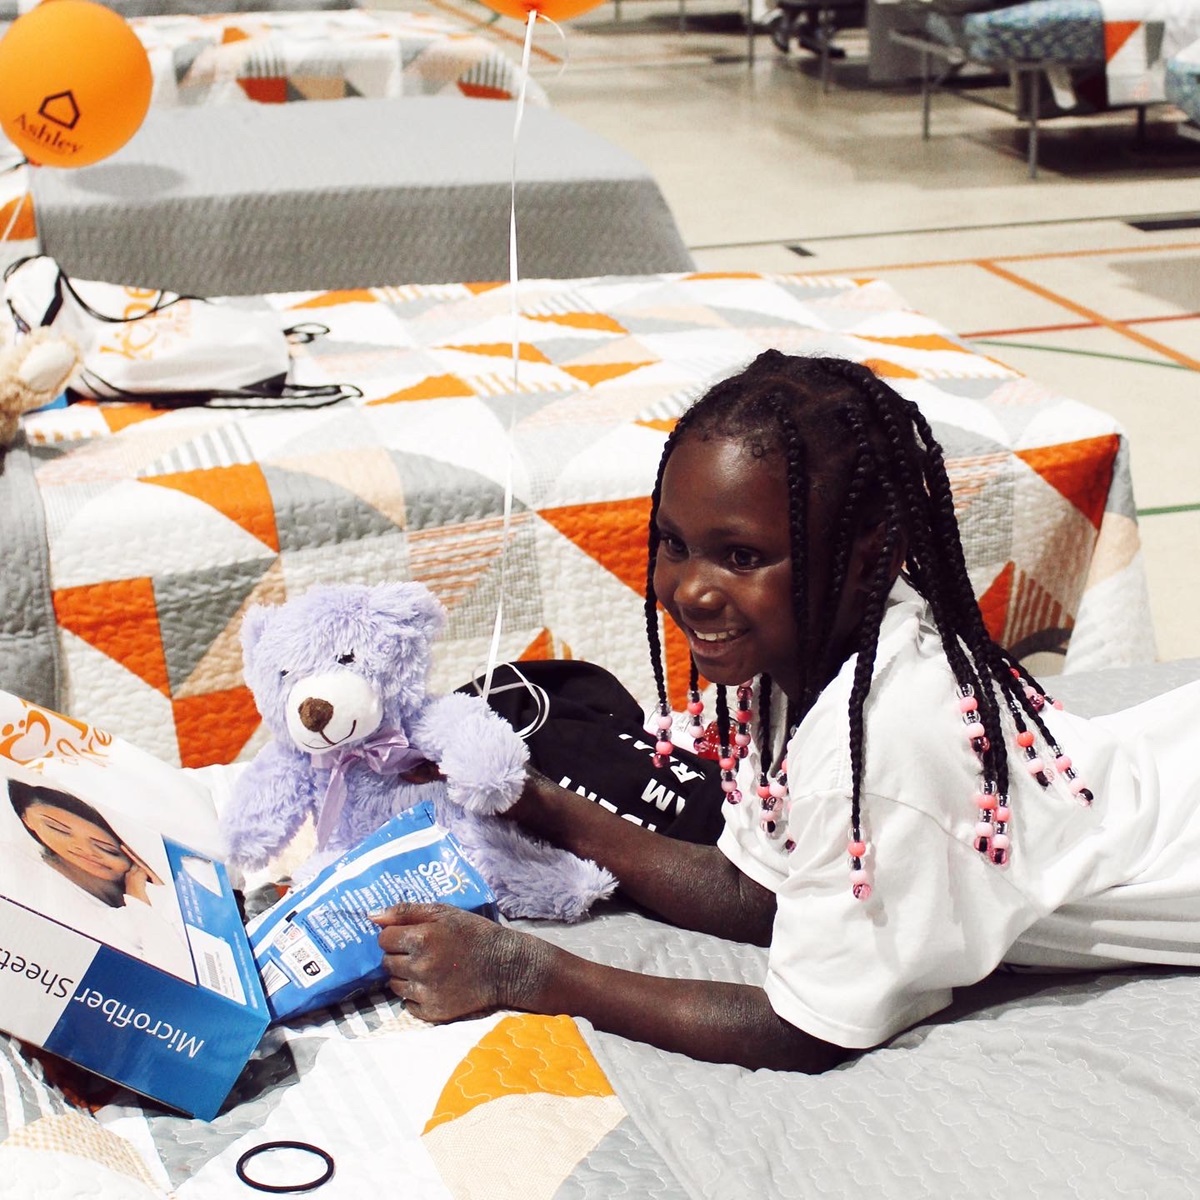 Ashley of Coastal Delaware's Hope to Dream Program and The Boys & Girls Clubs of Delaware Partner to Gift 25 Local Children In Need With New Beds and Mattresses